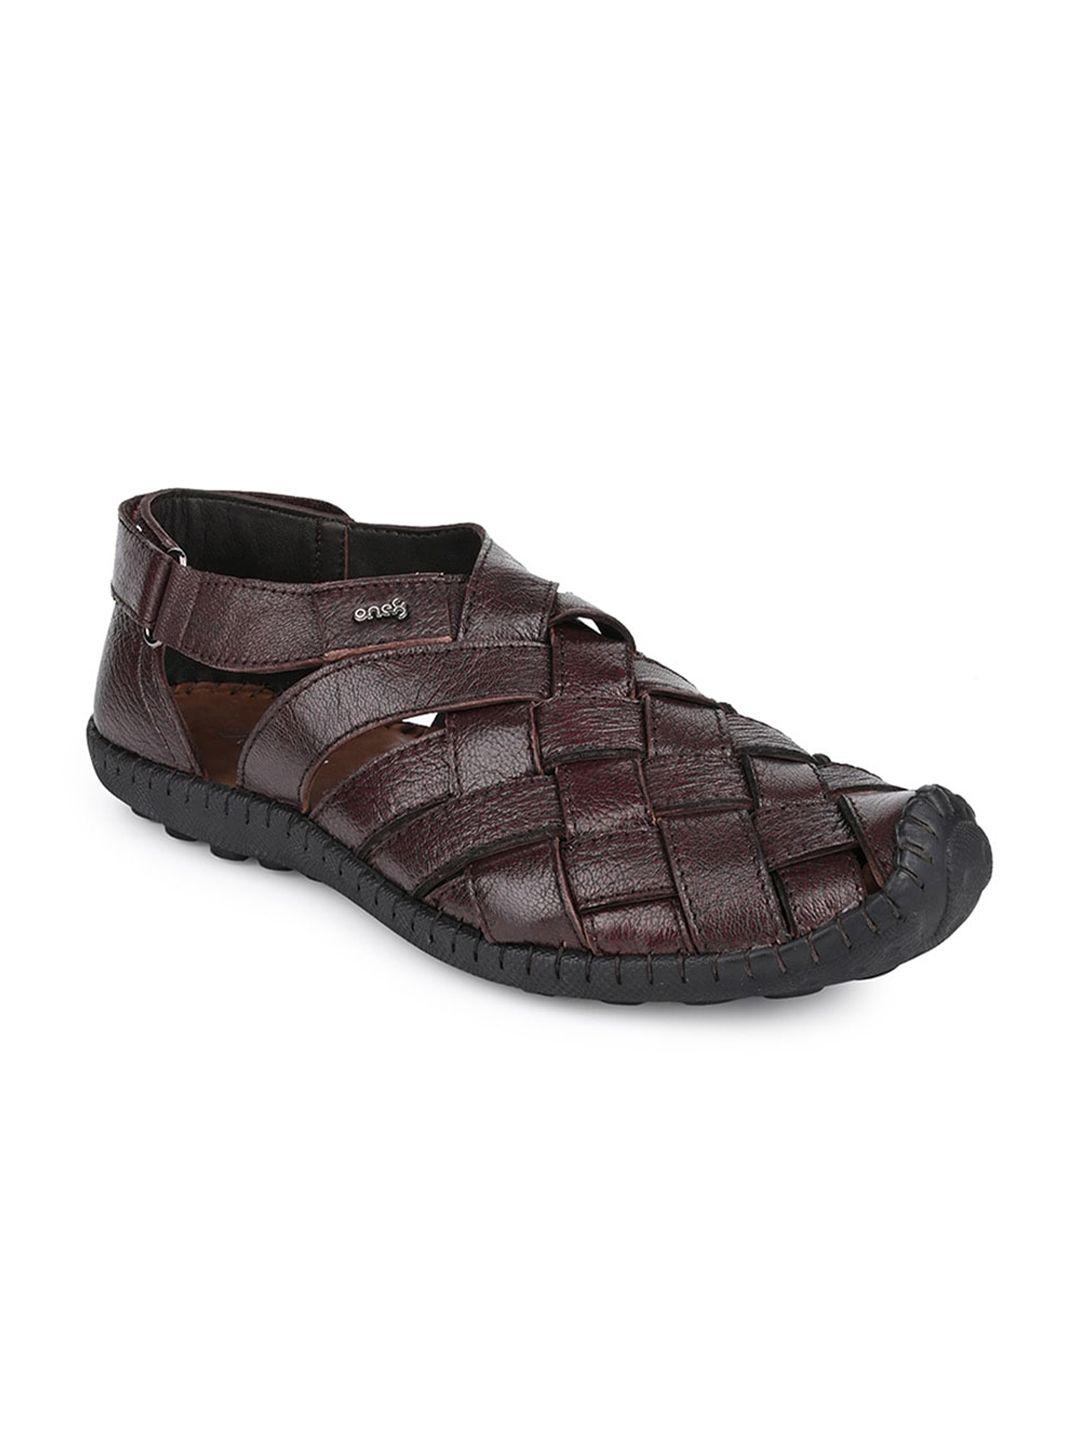 one8-men-leather-fisherman-sandals